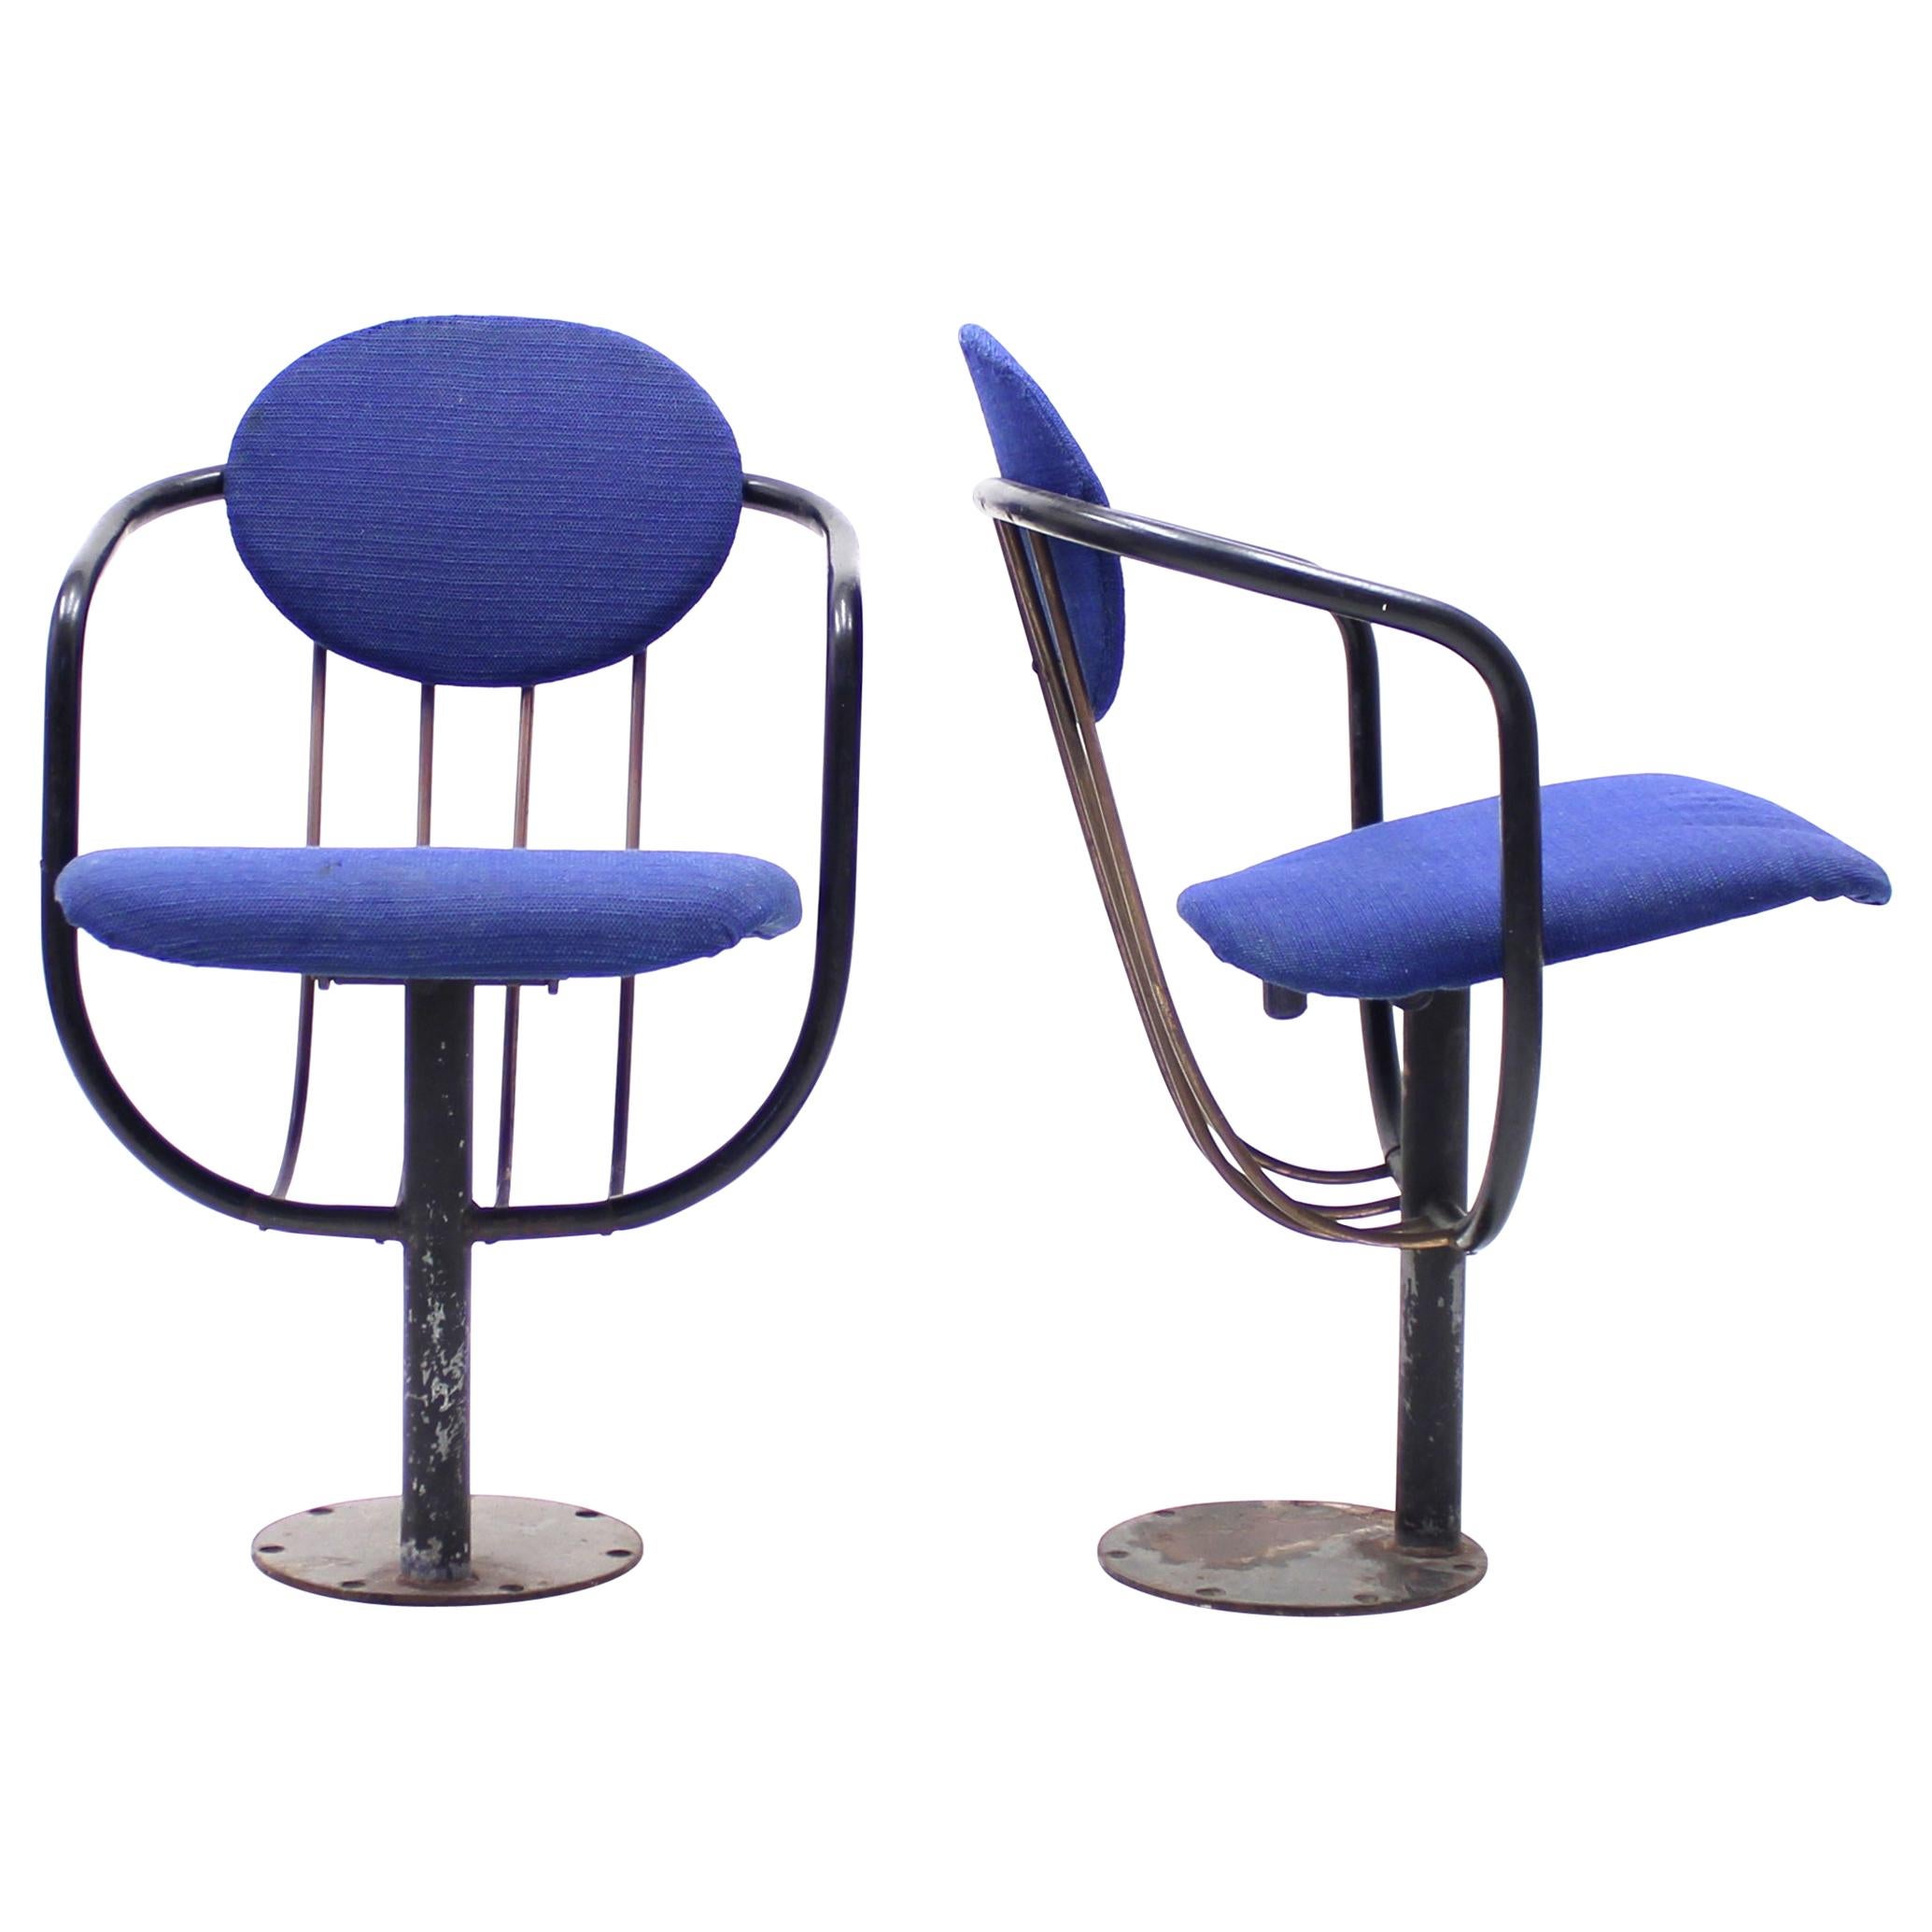 Poul Henningsen, Pair of Foldable Theatre Chairs for the Betty Nansen Theatre, 1 For Sale